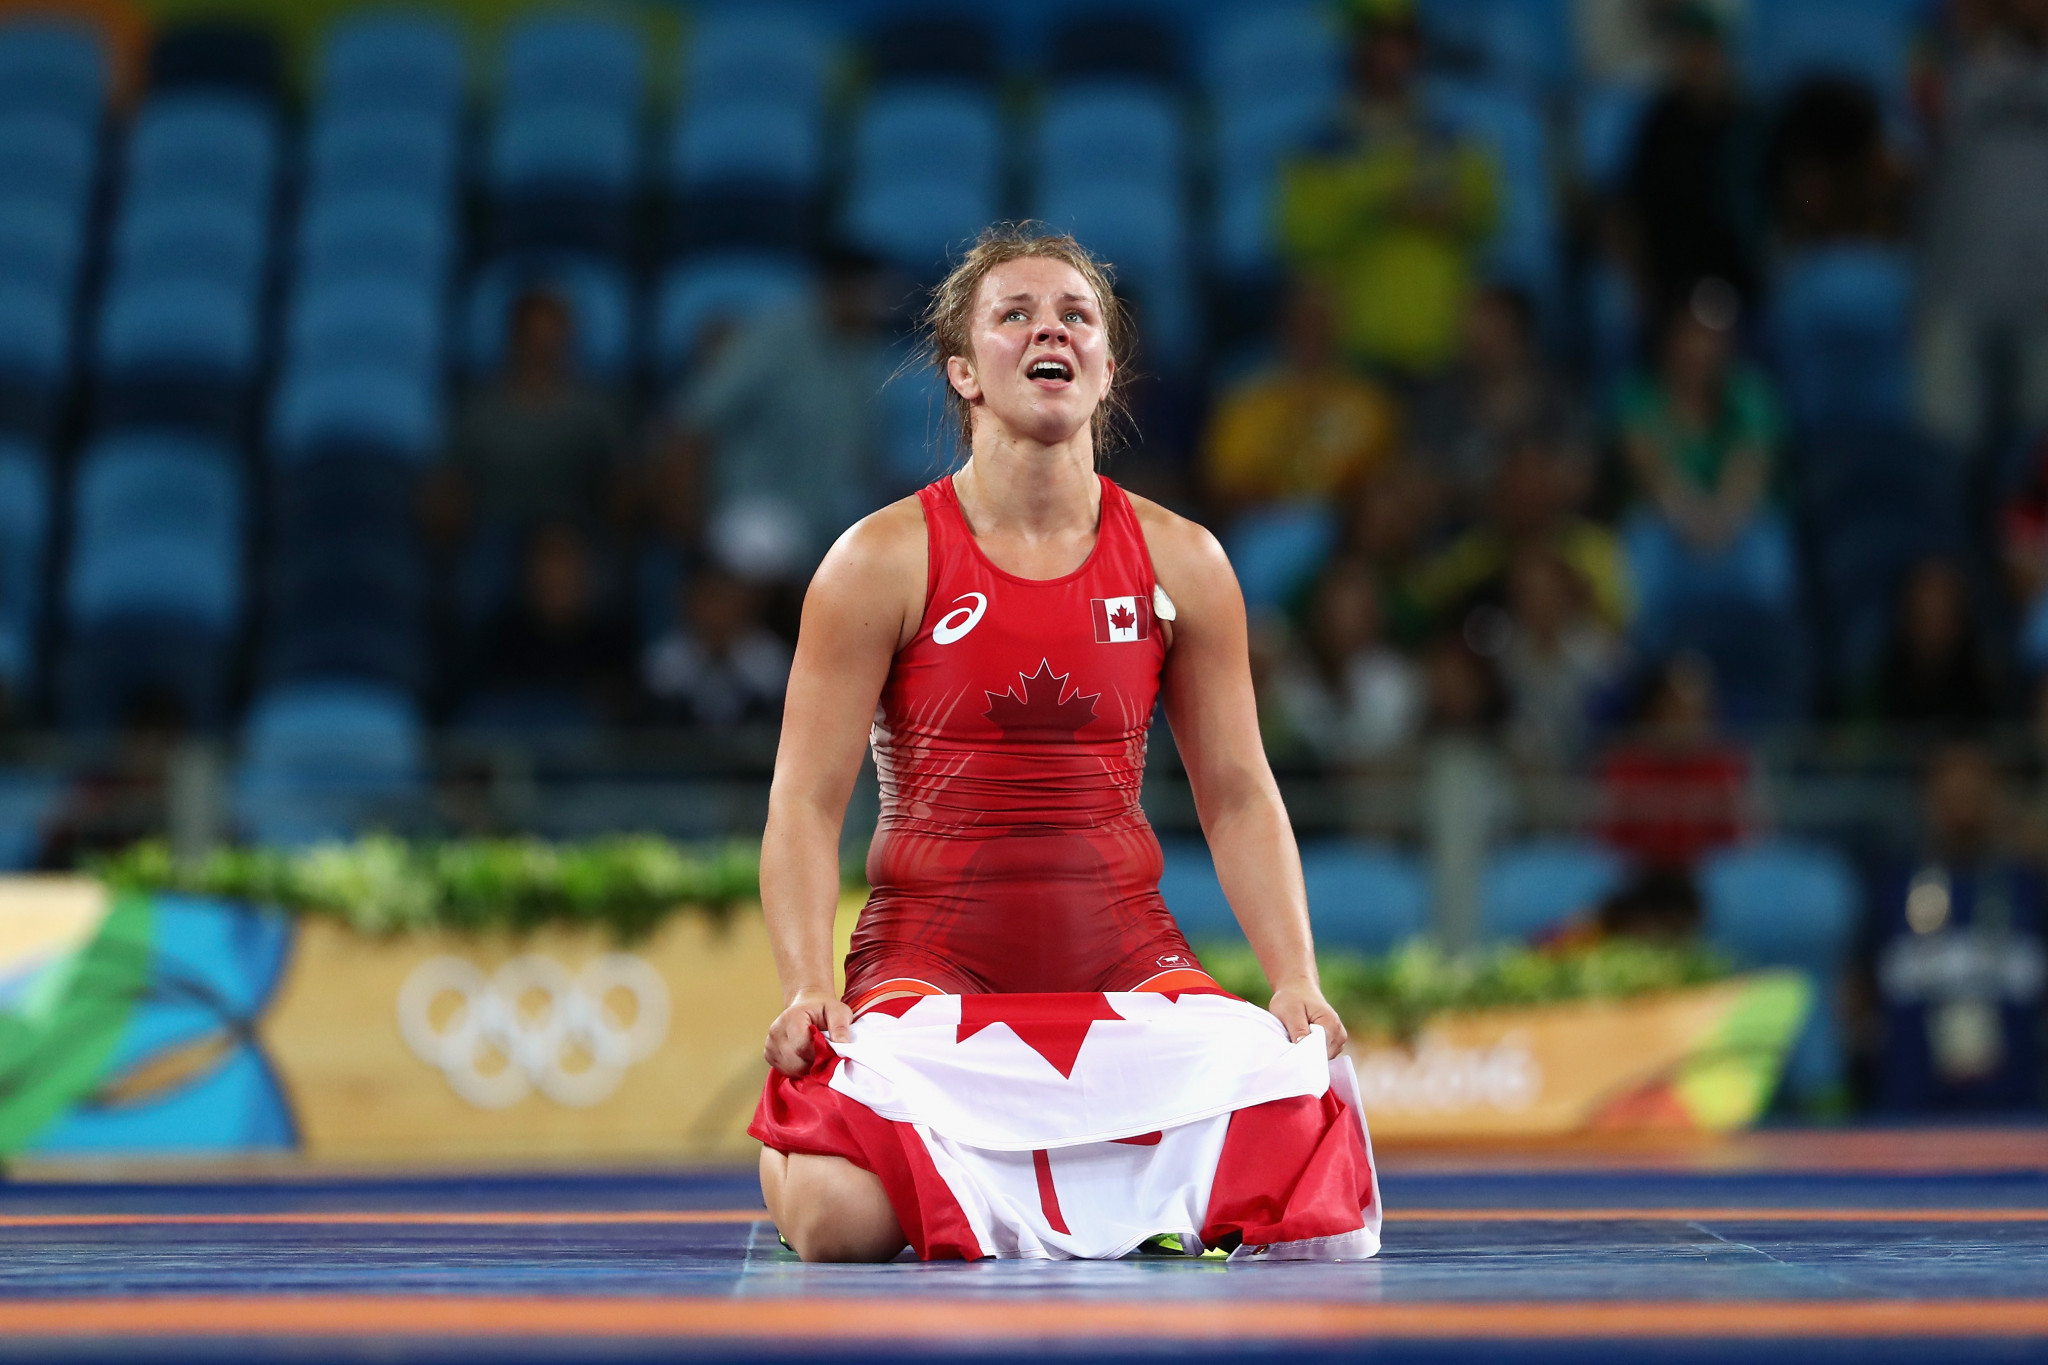 Erica Wiebe triumphed in the women's 75kg freestyle wrestling contest at the Rio 2016 Olympic Games ©Getty Images